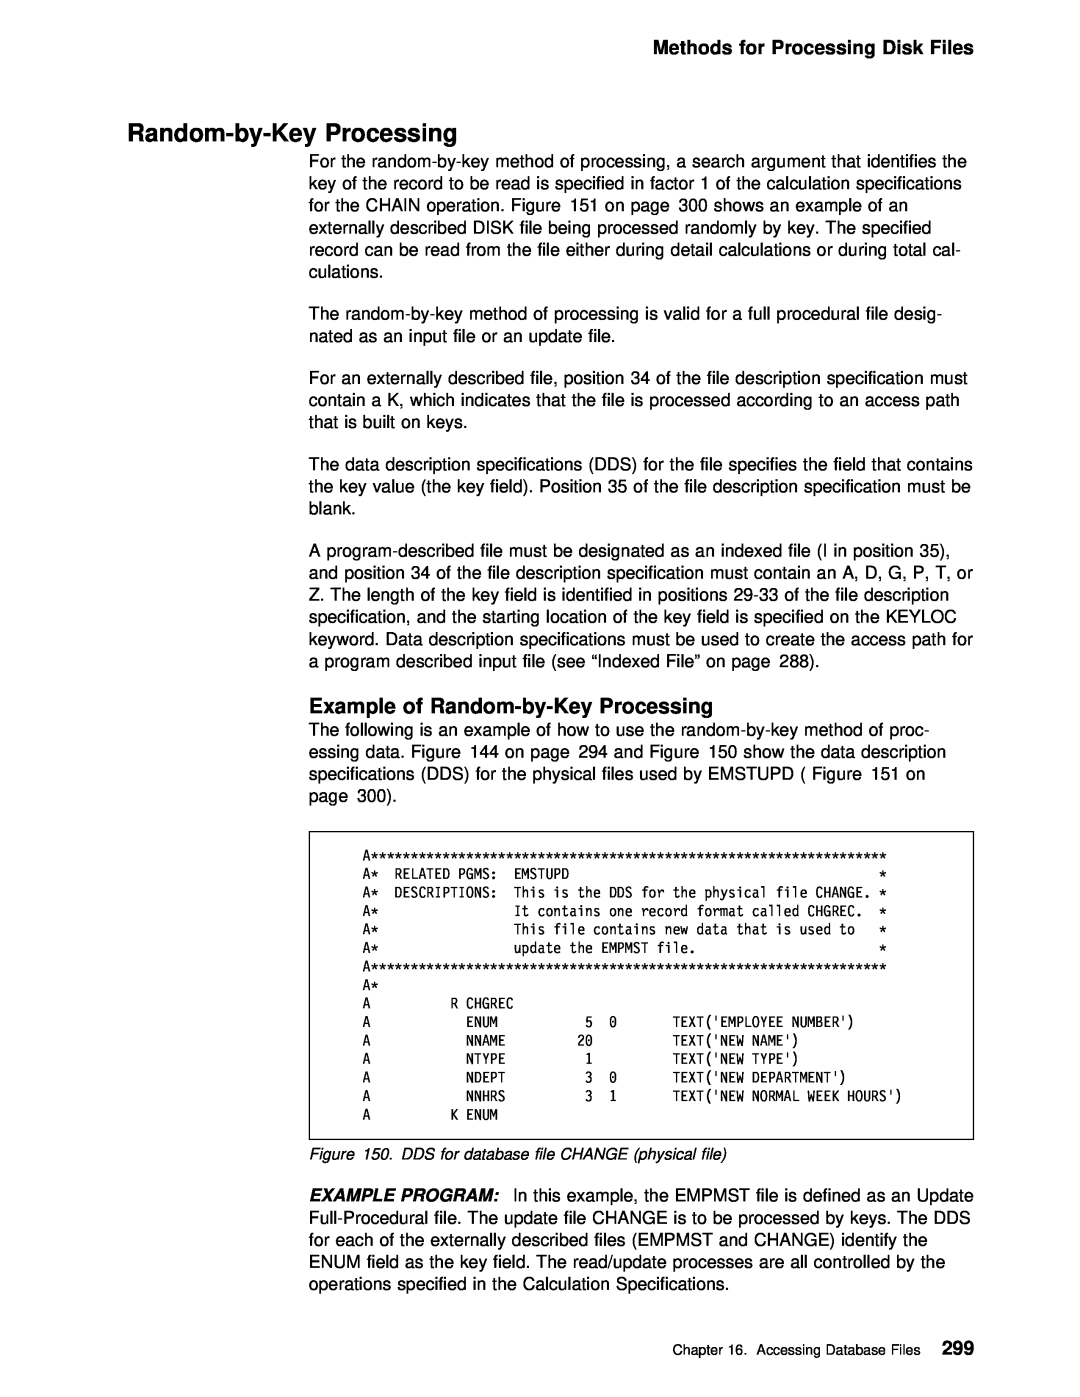 IBM AS/400 manual Example of Random-by-Key Processing, Methods for Processing Disk Files 